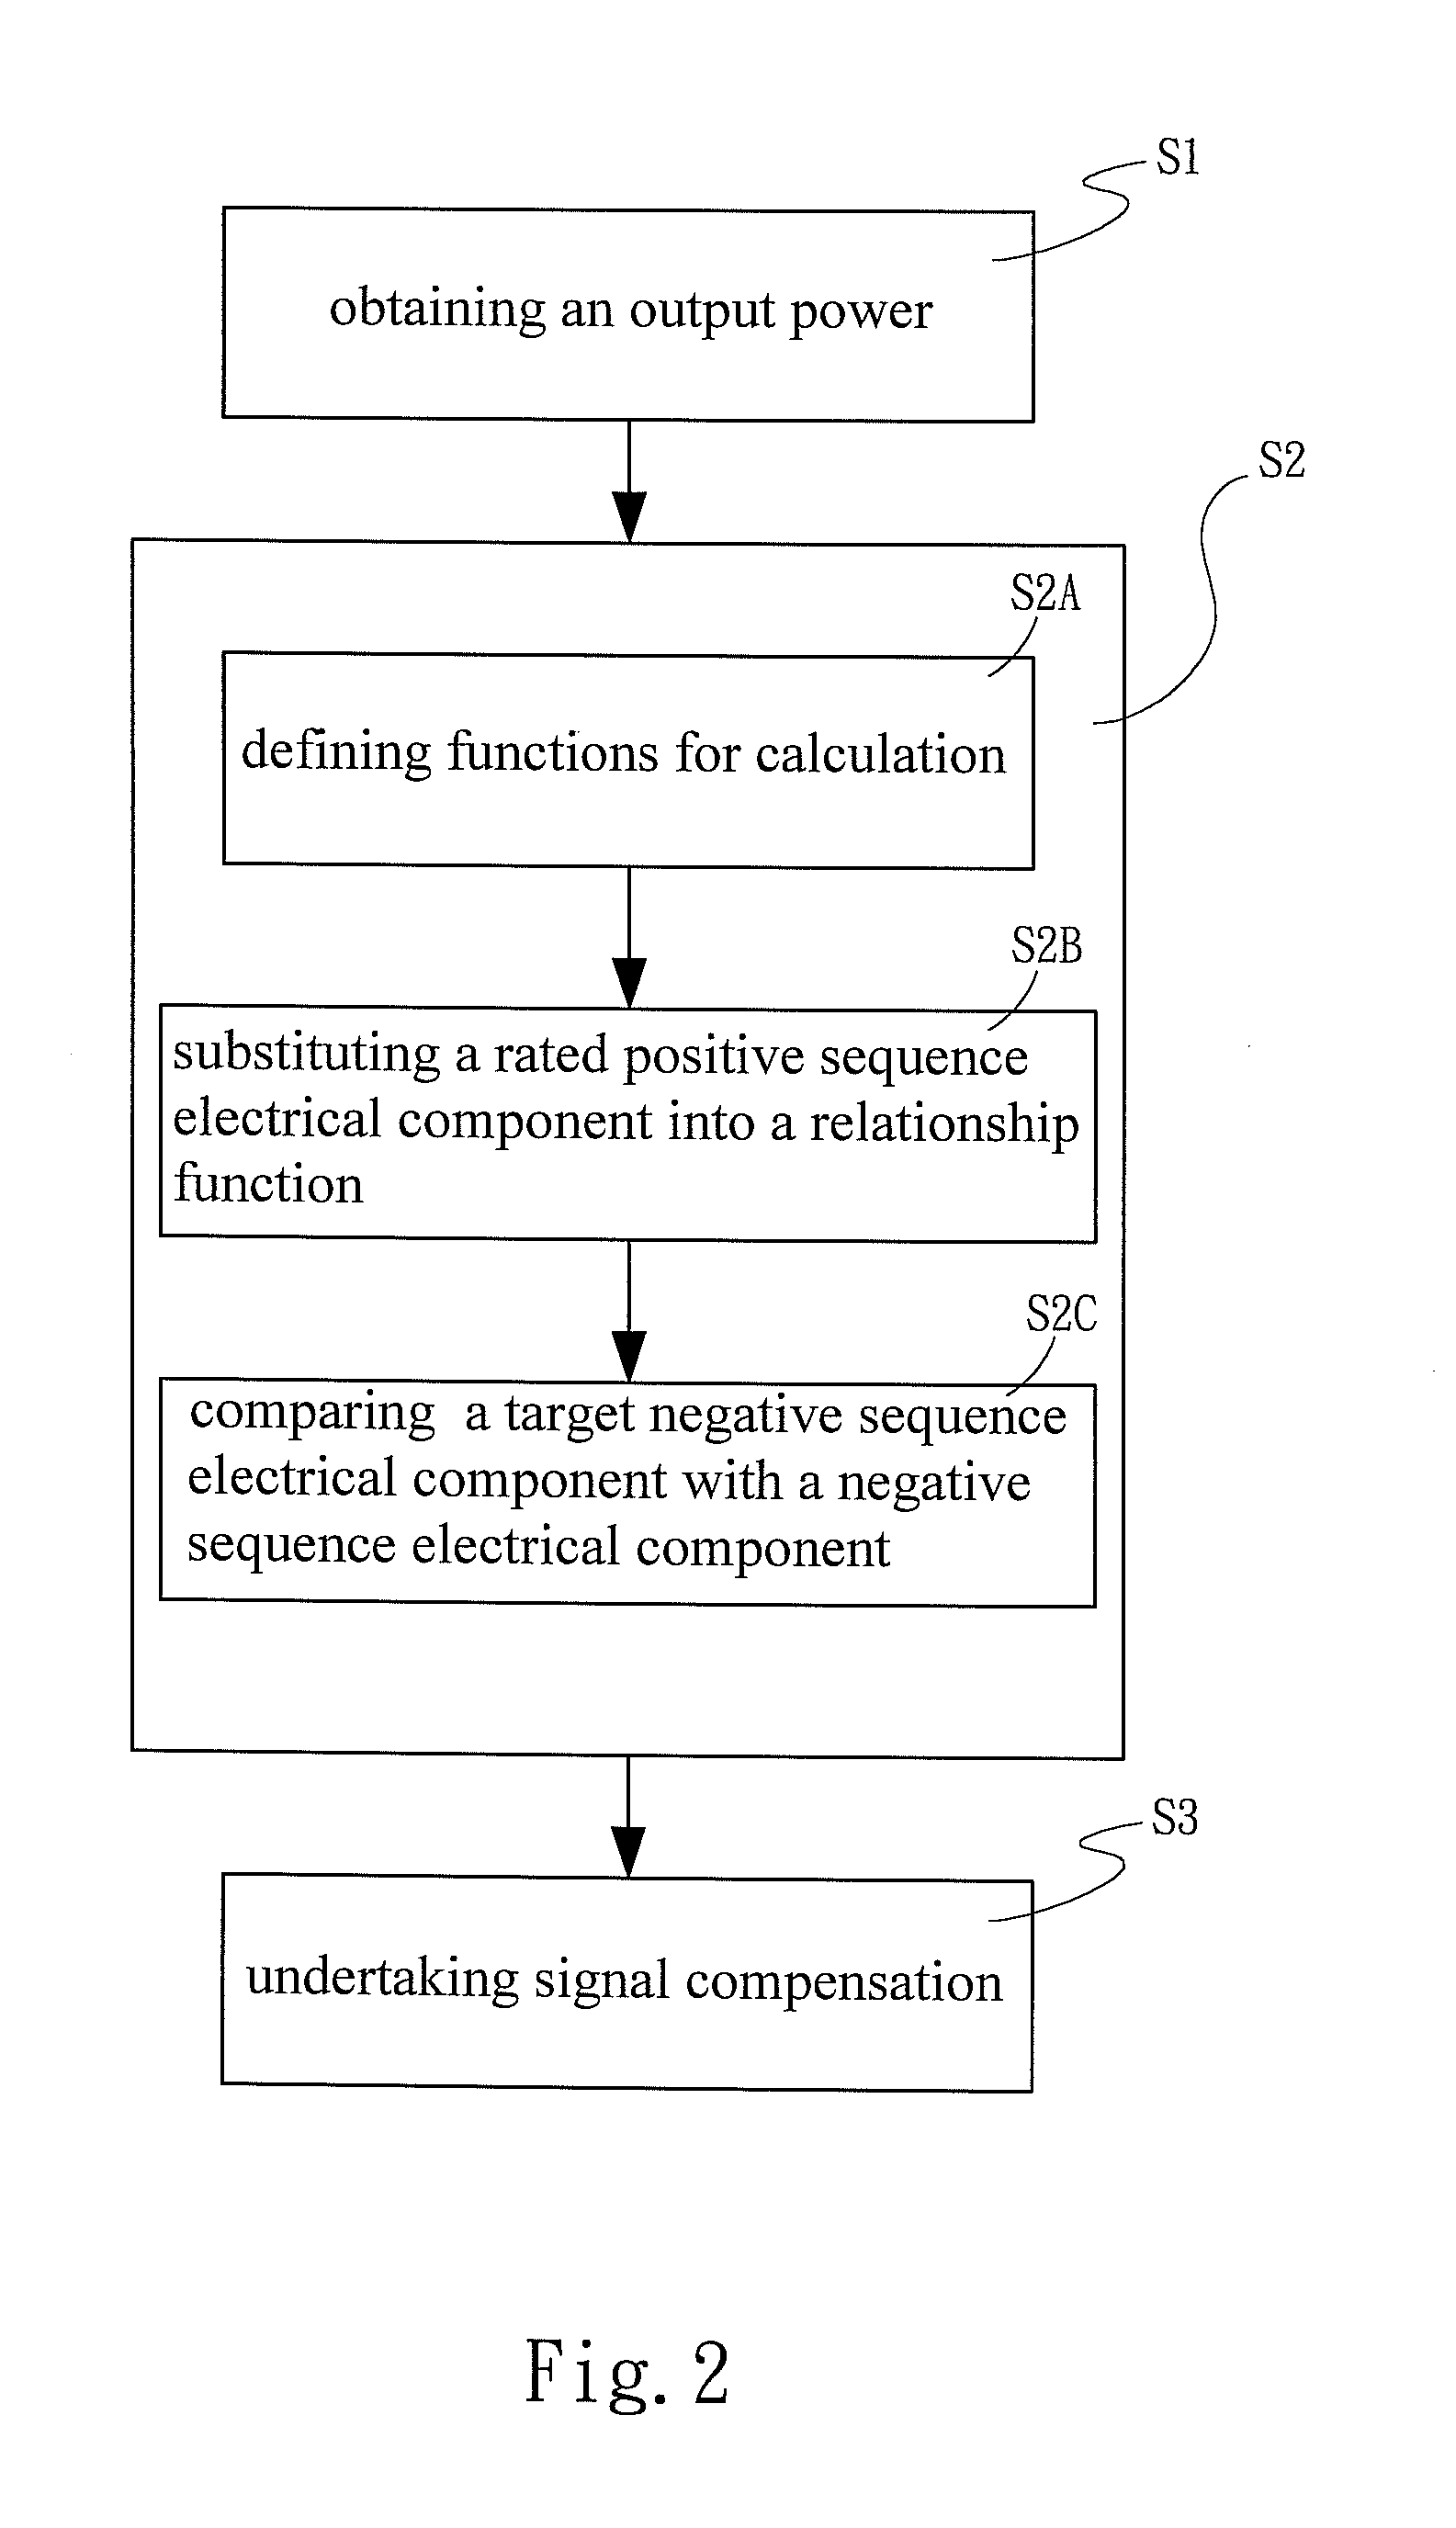 Low voltage ride-through control method for grid-connected converter of distributed energy resources